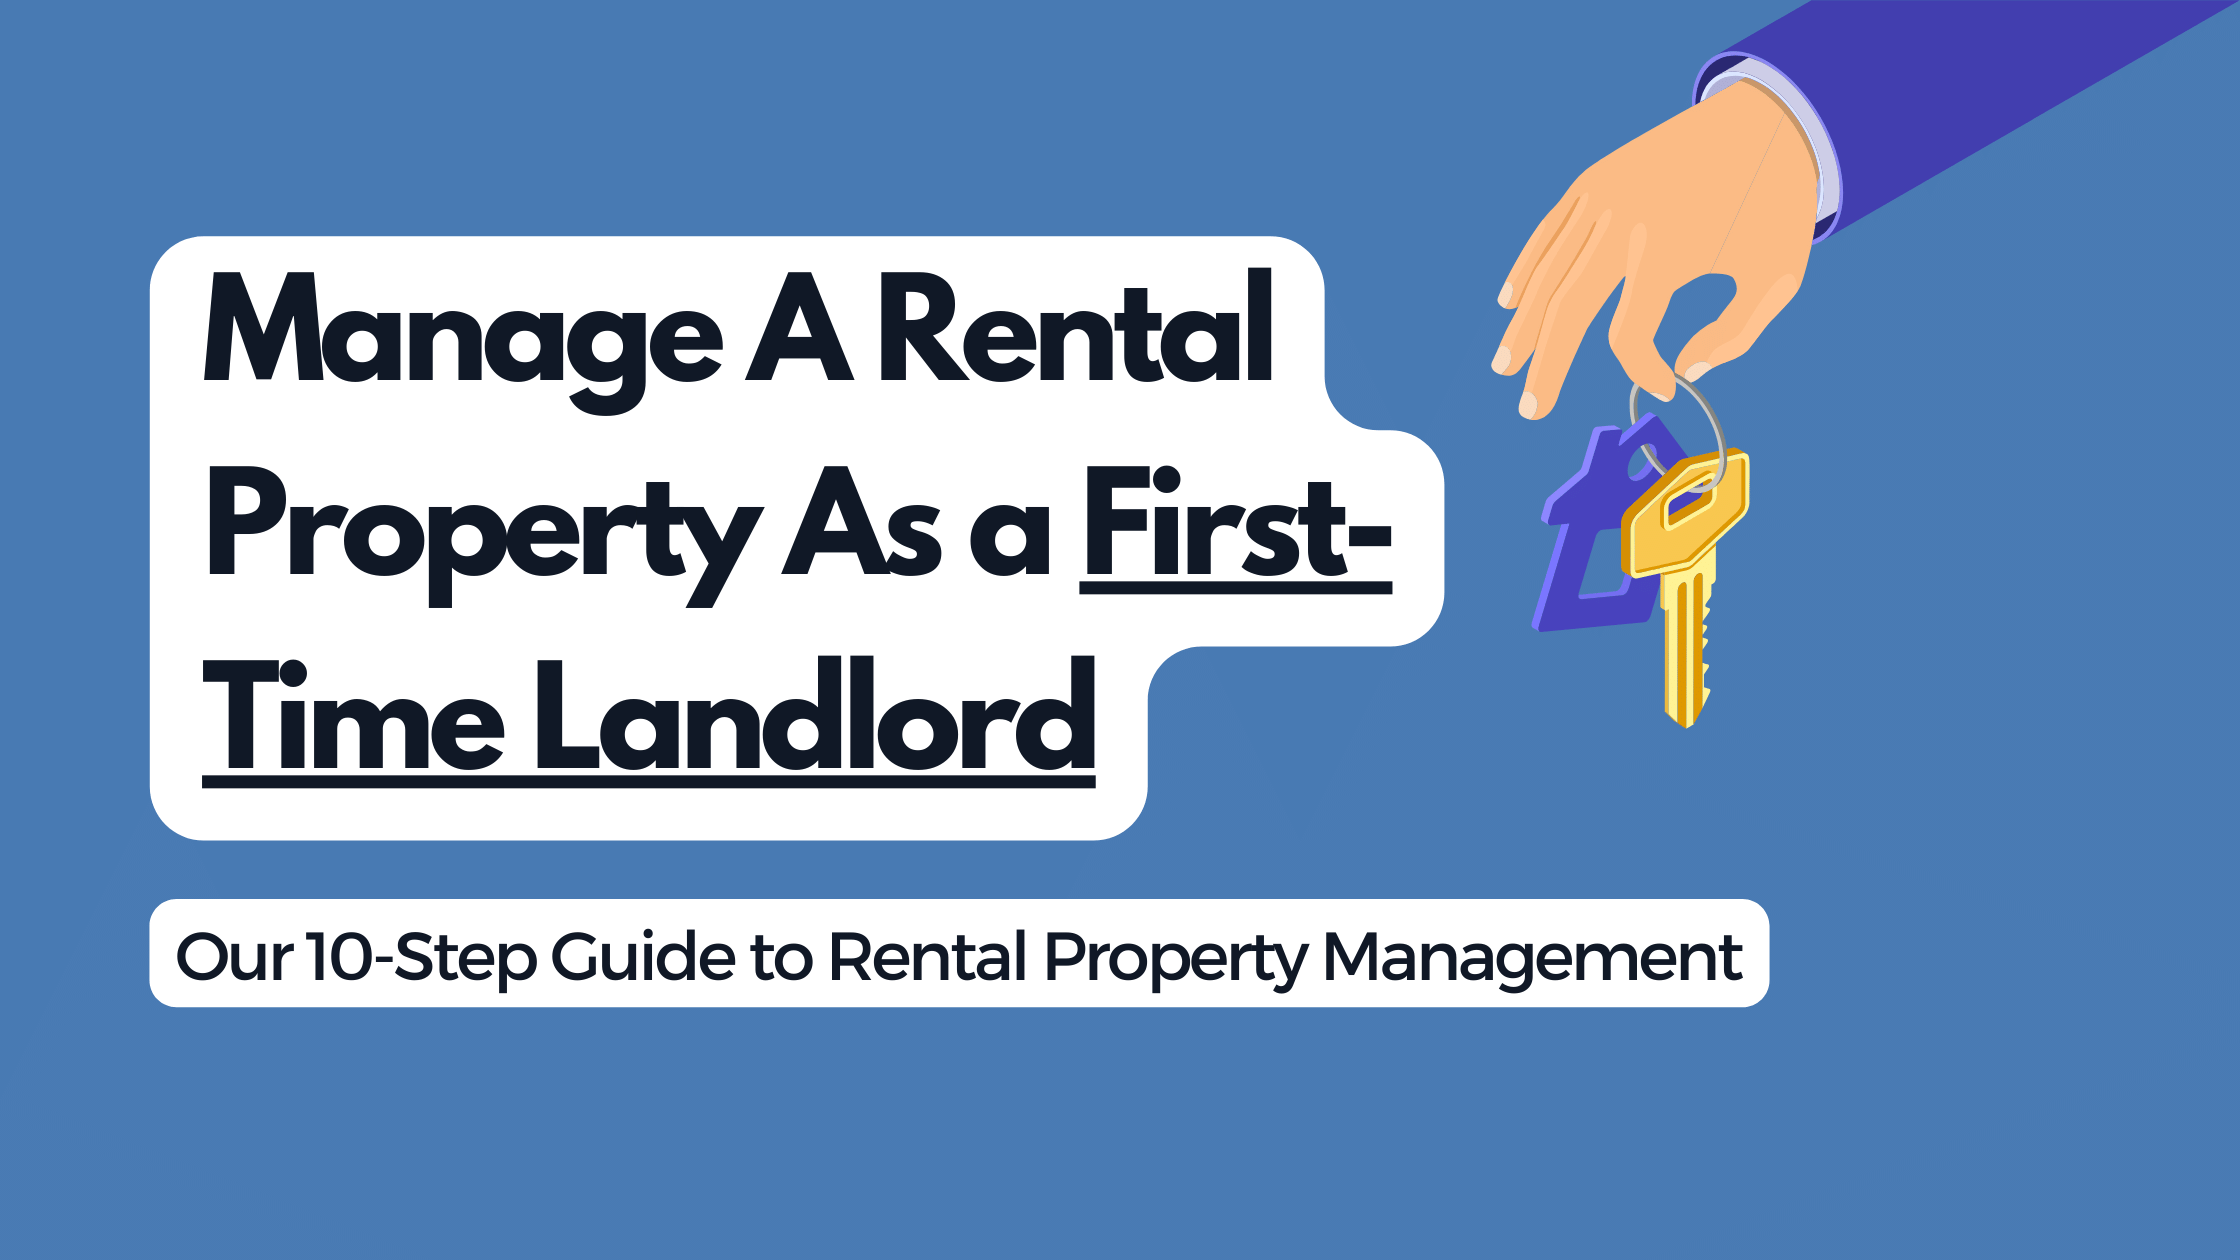 How to Manage Properties As a First-Time Landlord